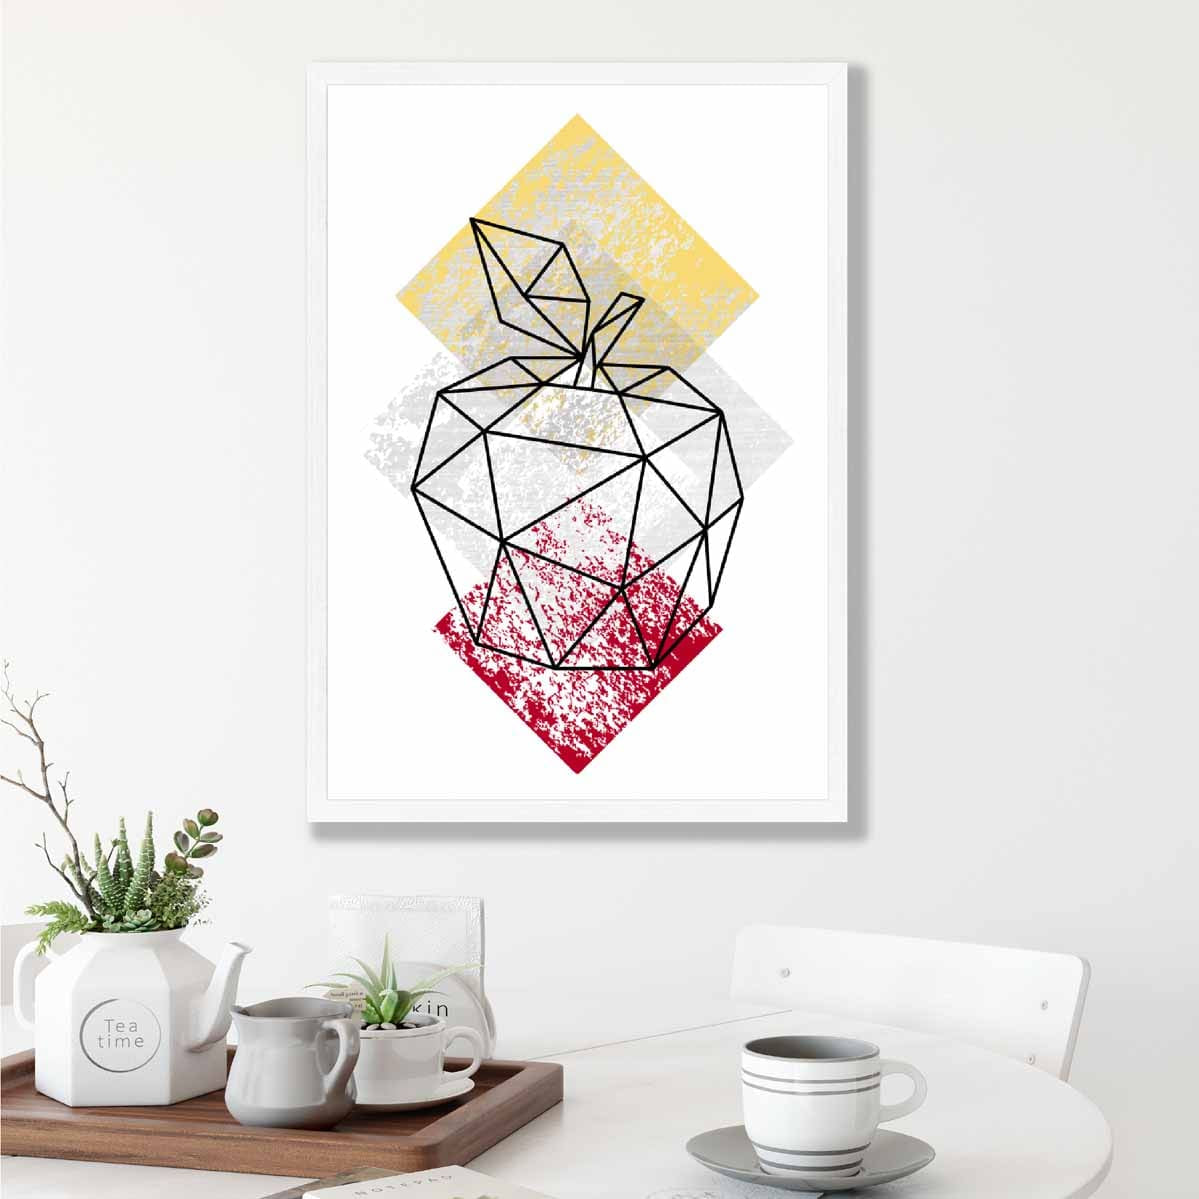 Geometric Fruit Line art Poster of Apple Textured Yellow Grey Red